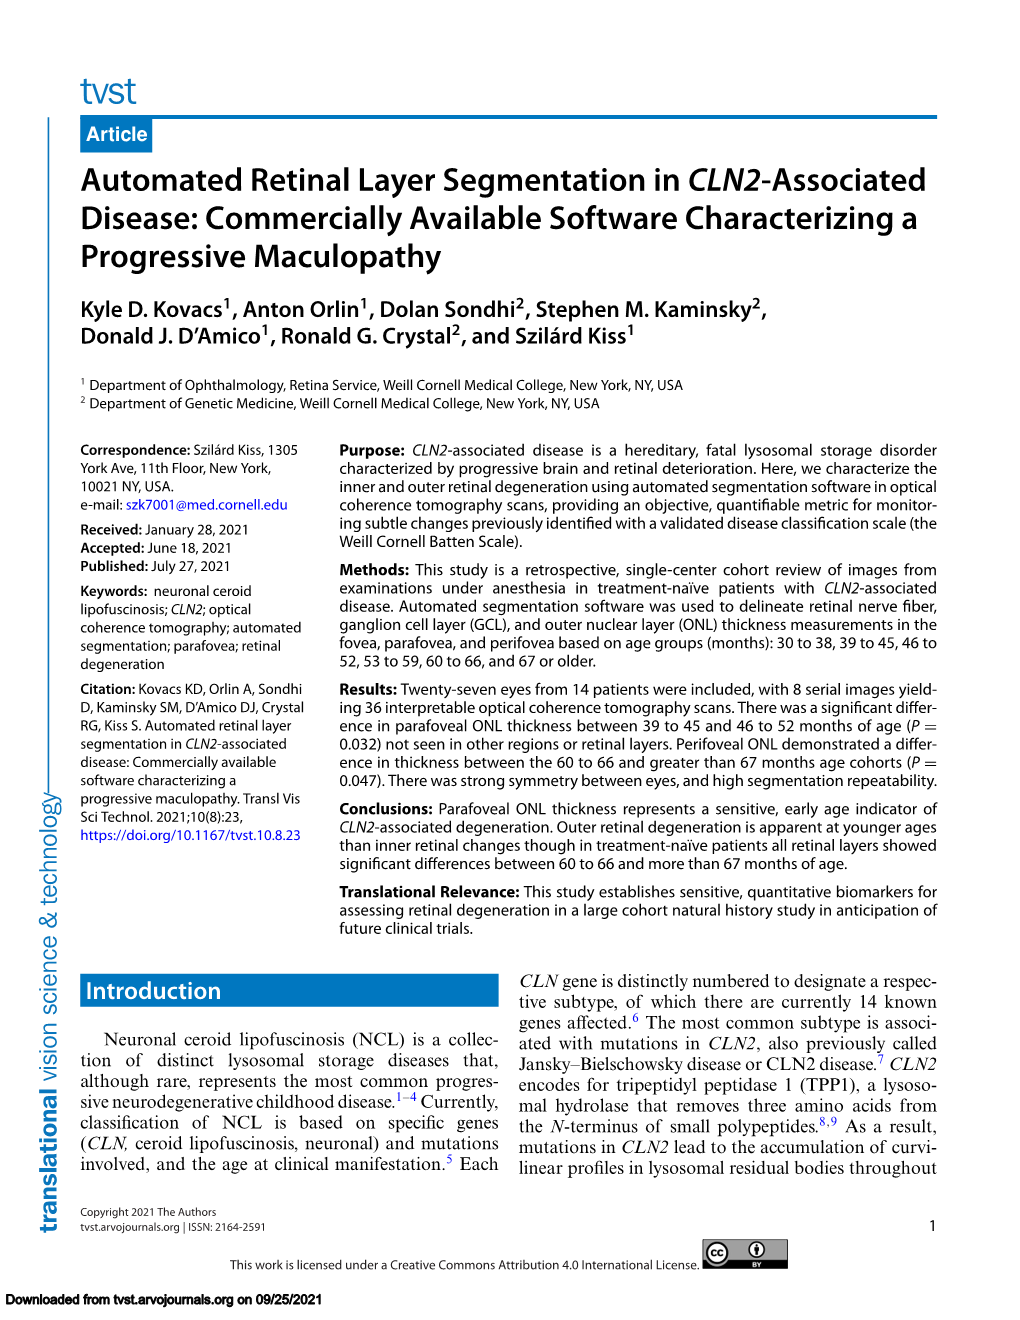 Automated Retinal Layer Segmentation in CLN2-Associated Disease: Commercially Available Software Characterizing a Progressive Maculopathy